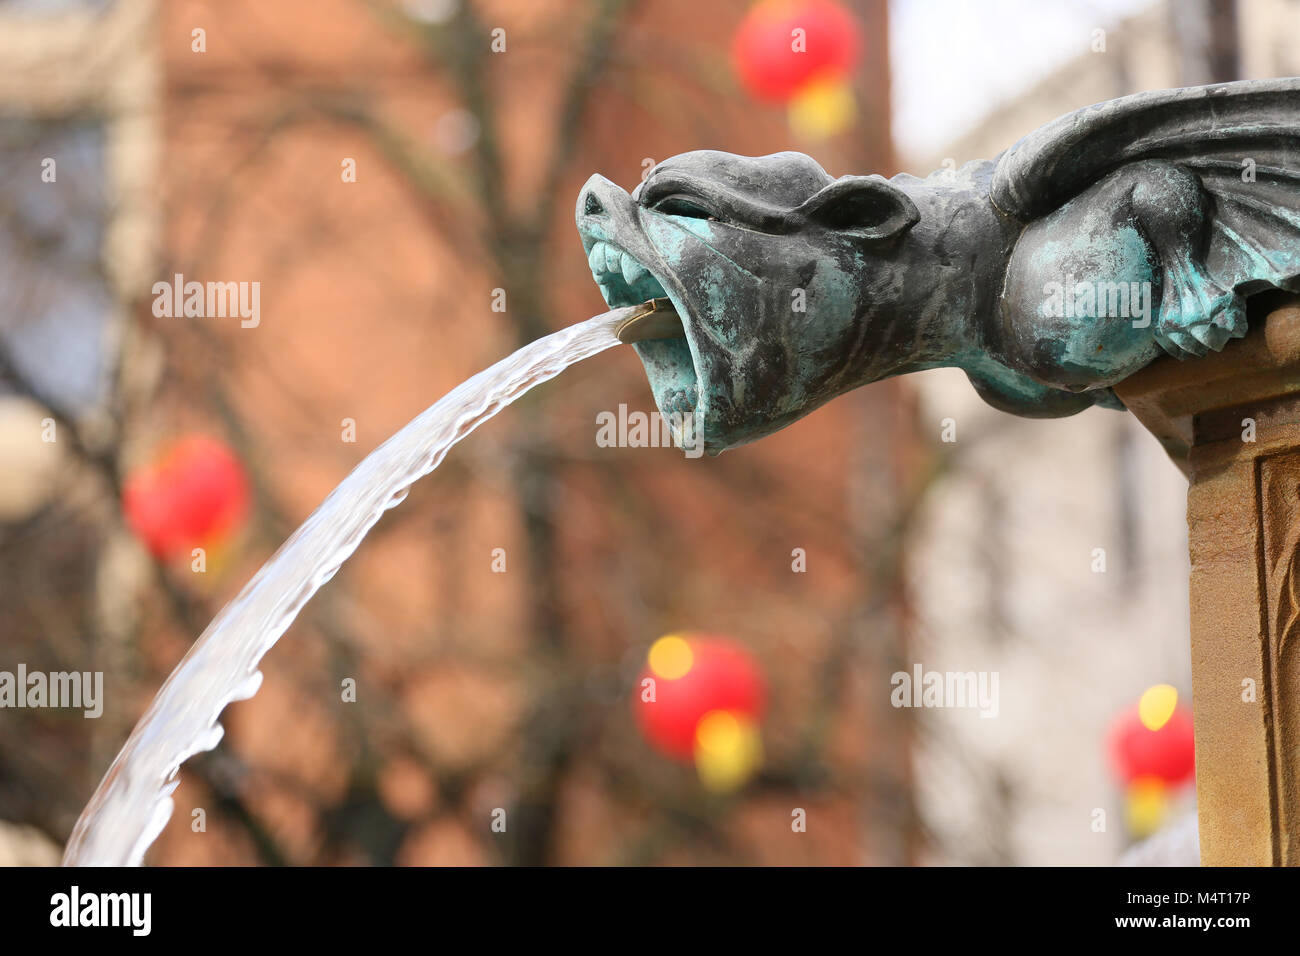 Manchester, UK. 17th Feb, 2018. A Gargoyle with water spout in front of Chinese lanterns,  Manchester, 17th February, 2018 (C)Barbara Cook/Alamy Live News Stock Photo